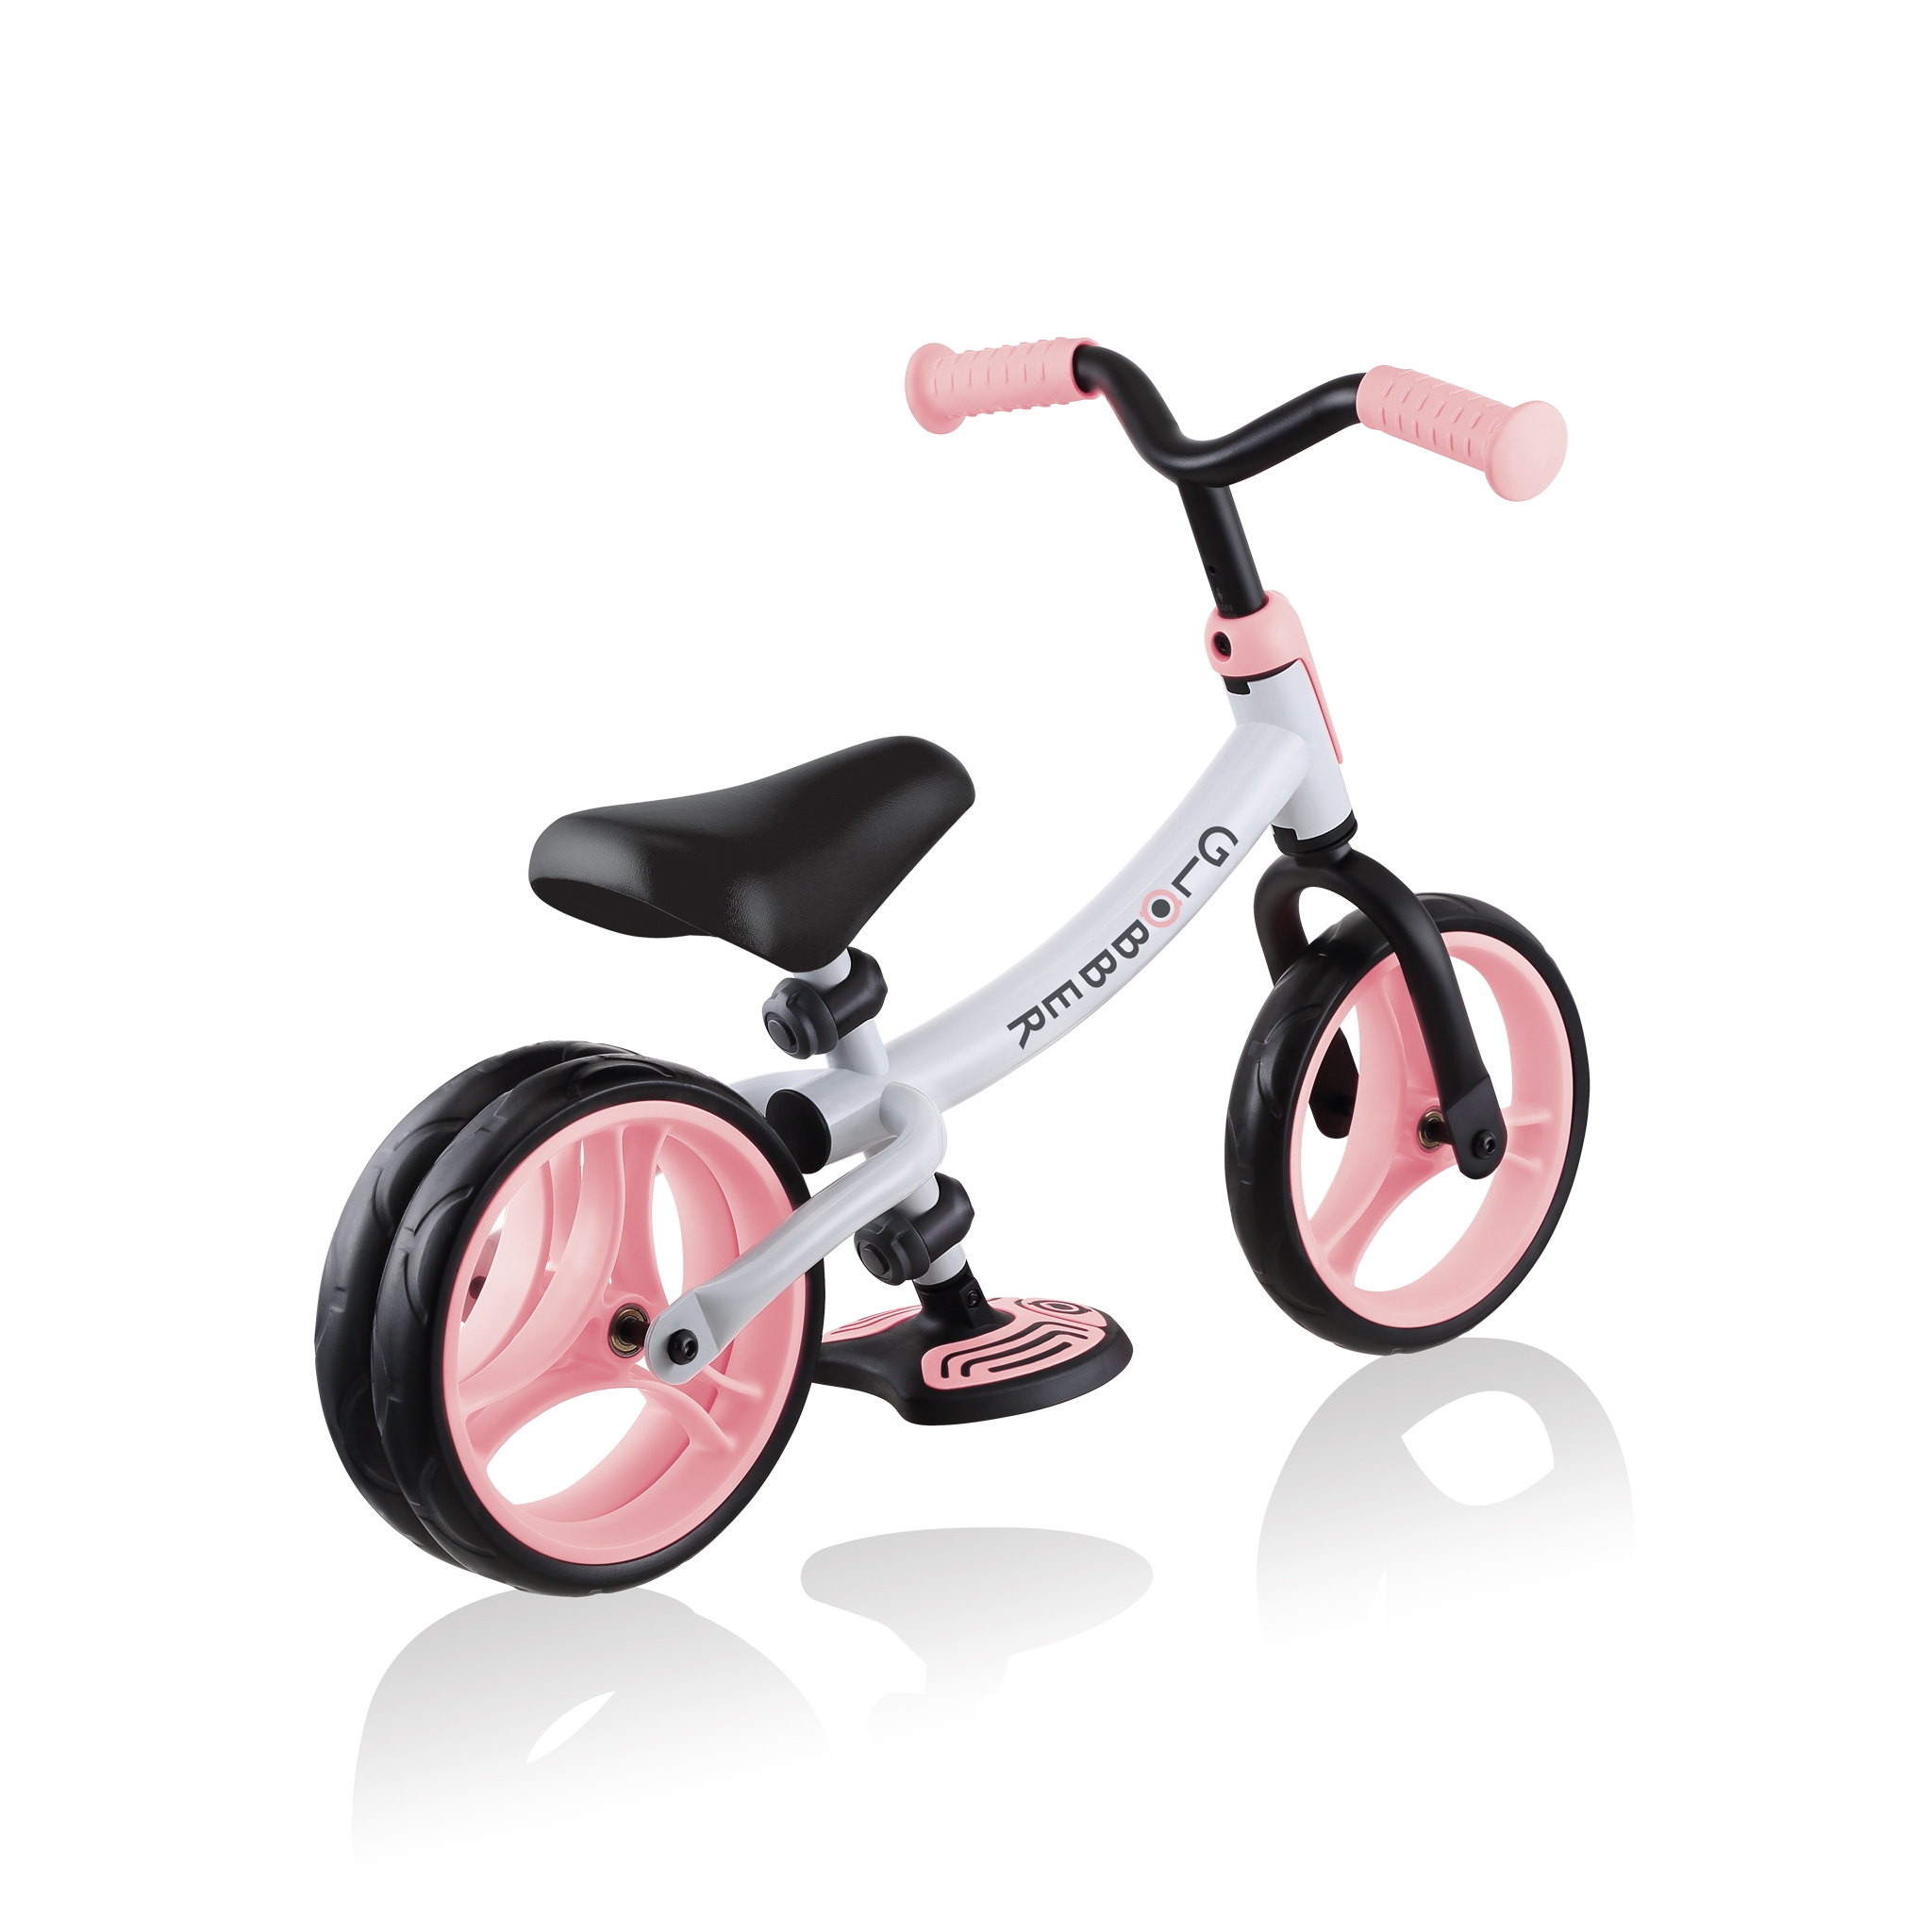 GO-BIKE-DUO-white-balance-bikes-for-toddlers-with-robust-steel-frame 3